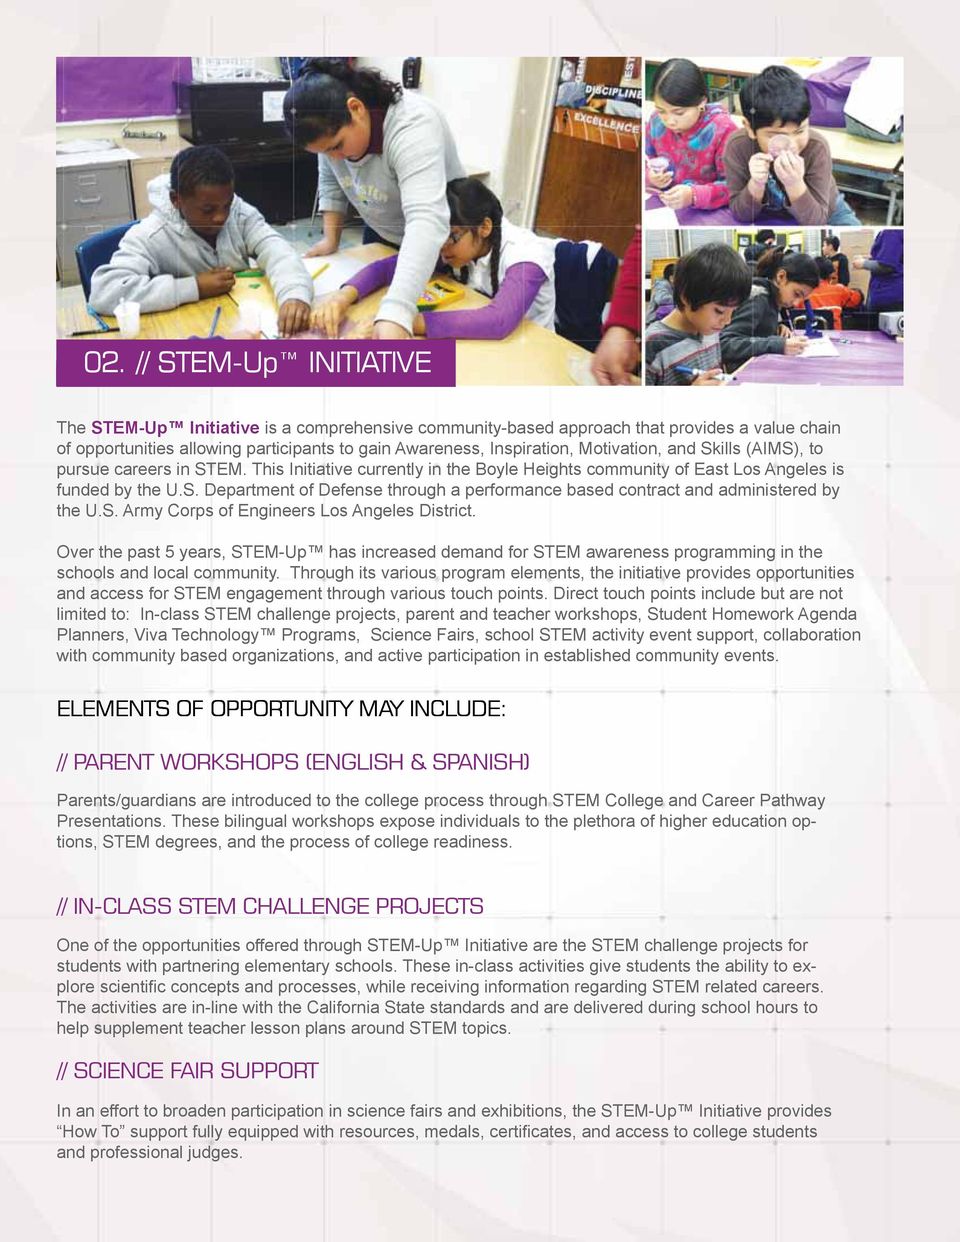 S. Army Corps of Engineers Los Angeles District. Over the past 5 years, STEM-Up has increased demand for STEM awareness programming in the schools and local community.